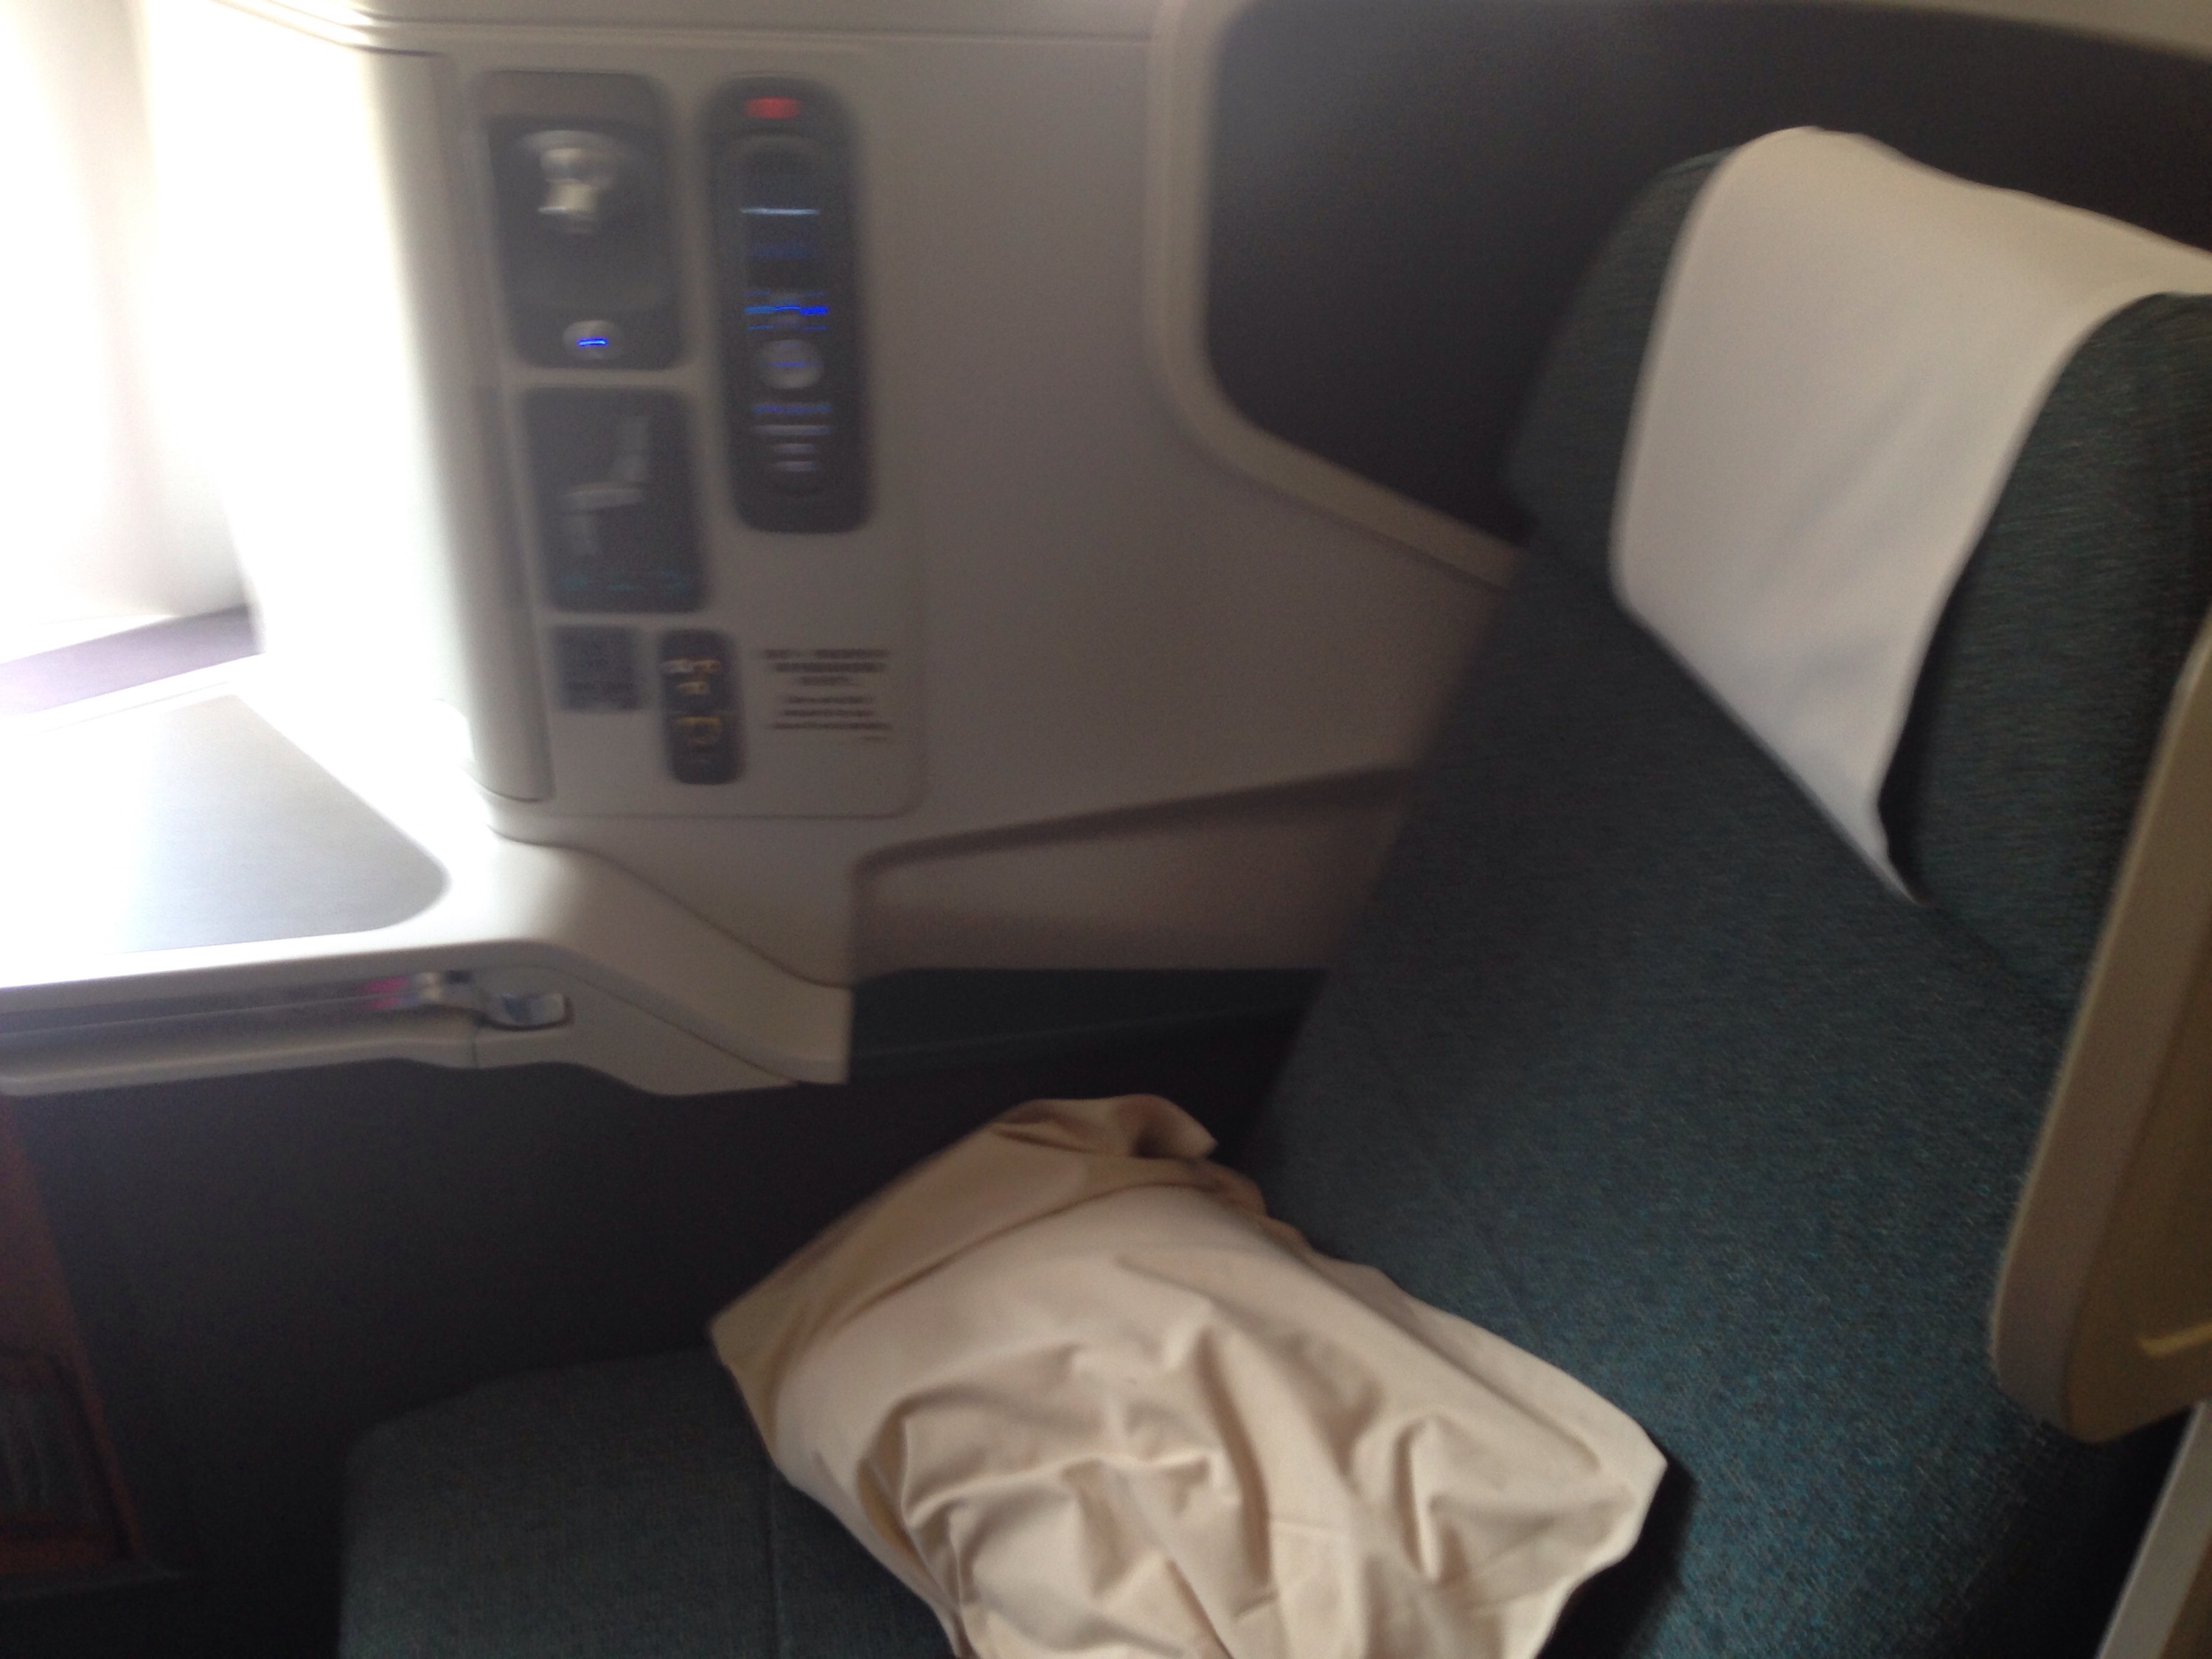 a seat with a pillow on it